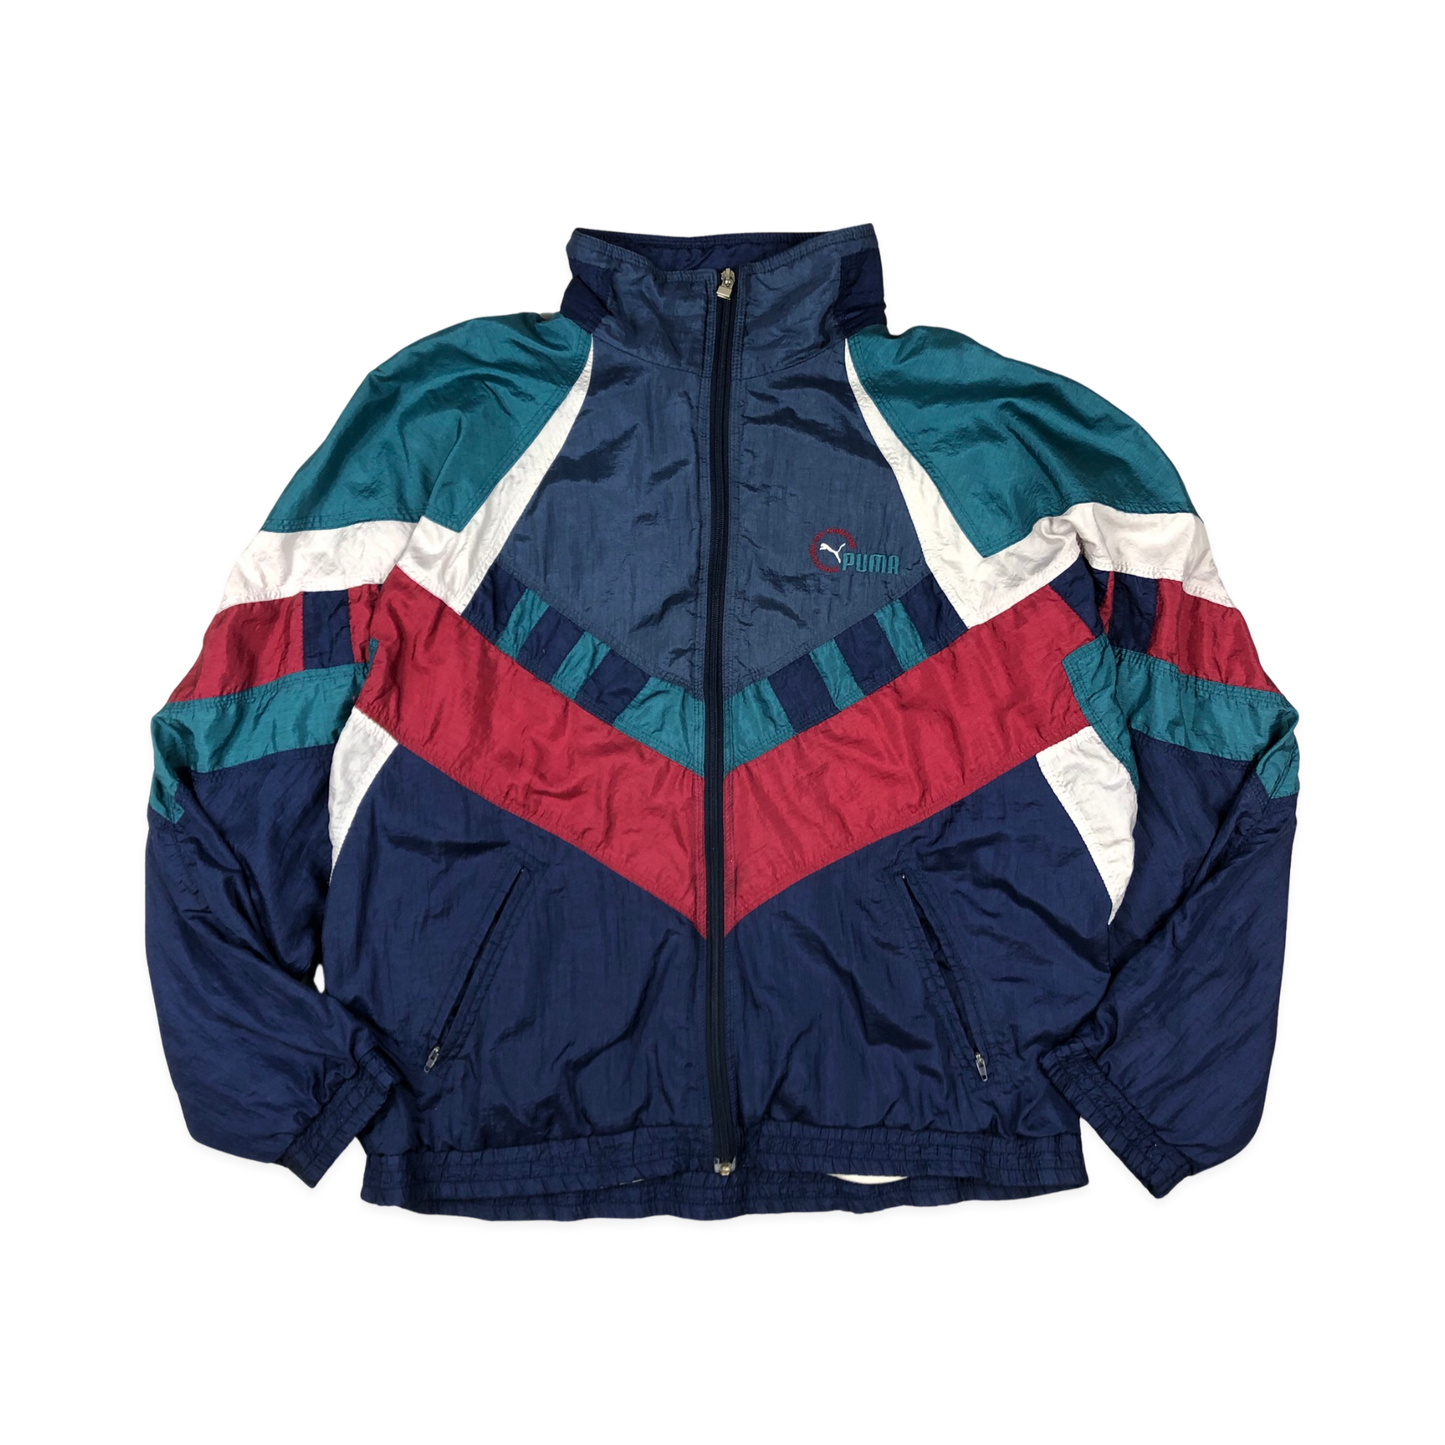 Vintage 80s 90s Puma Navy, Teal, and Red Shell Coat M L XL